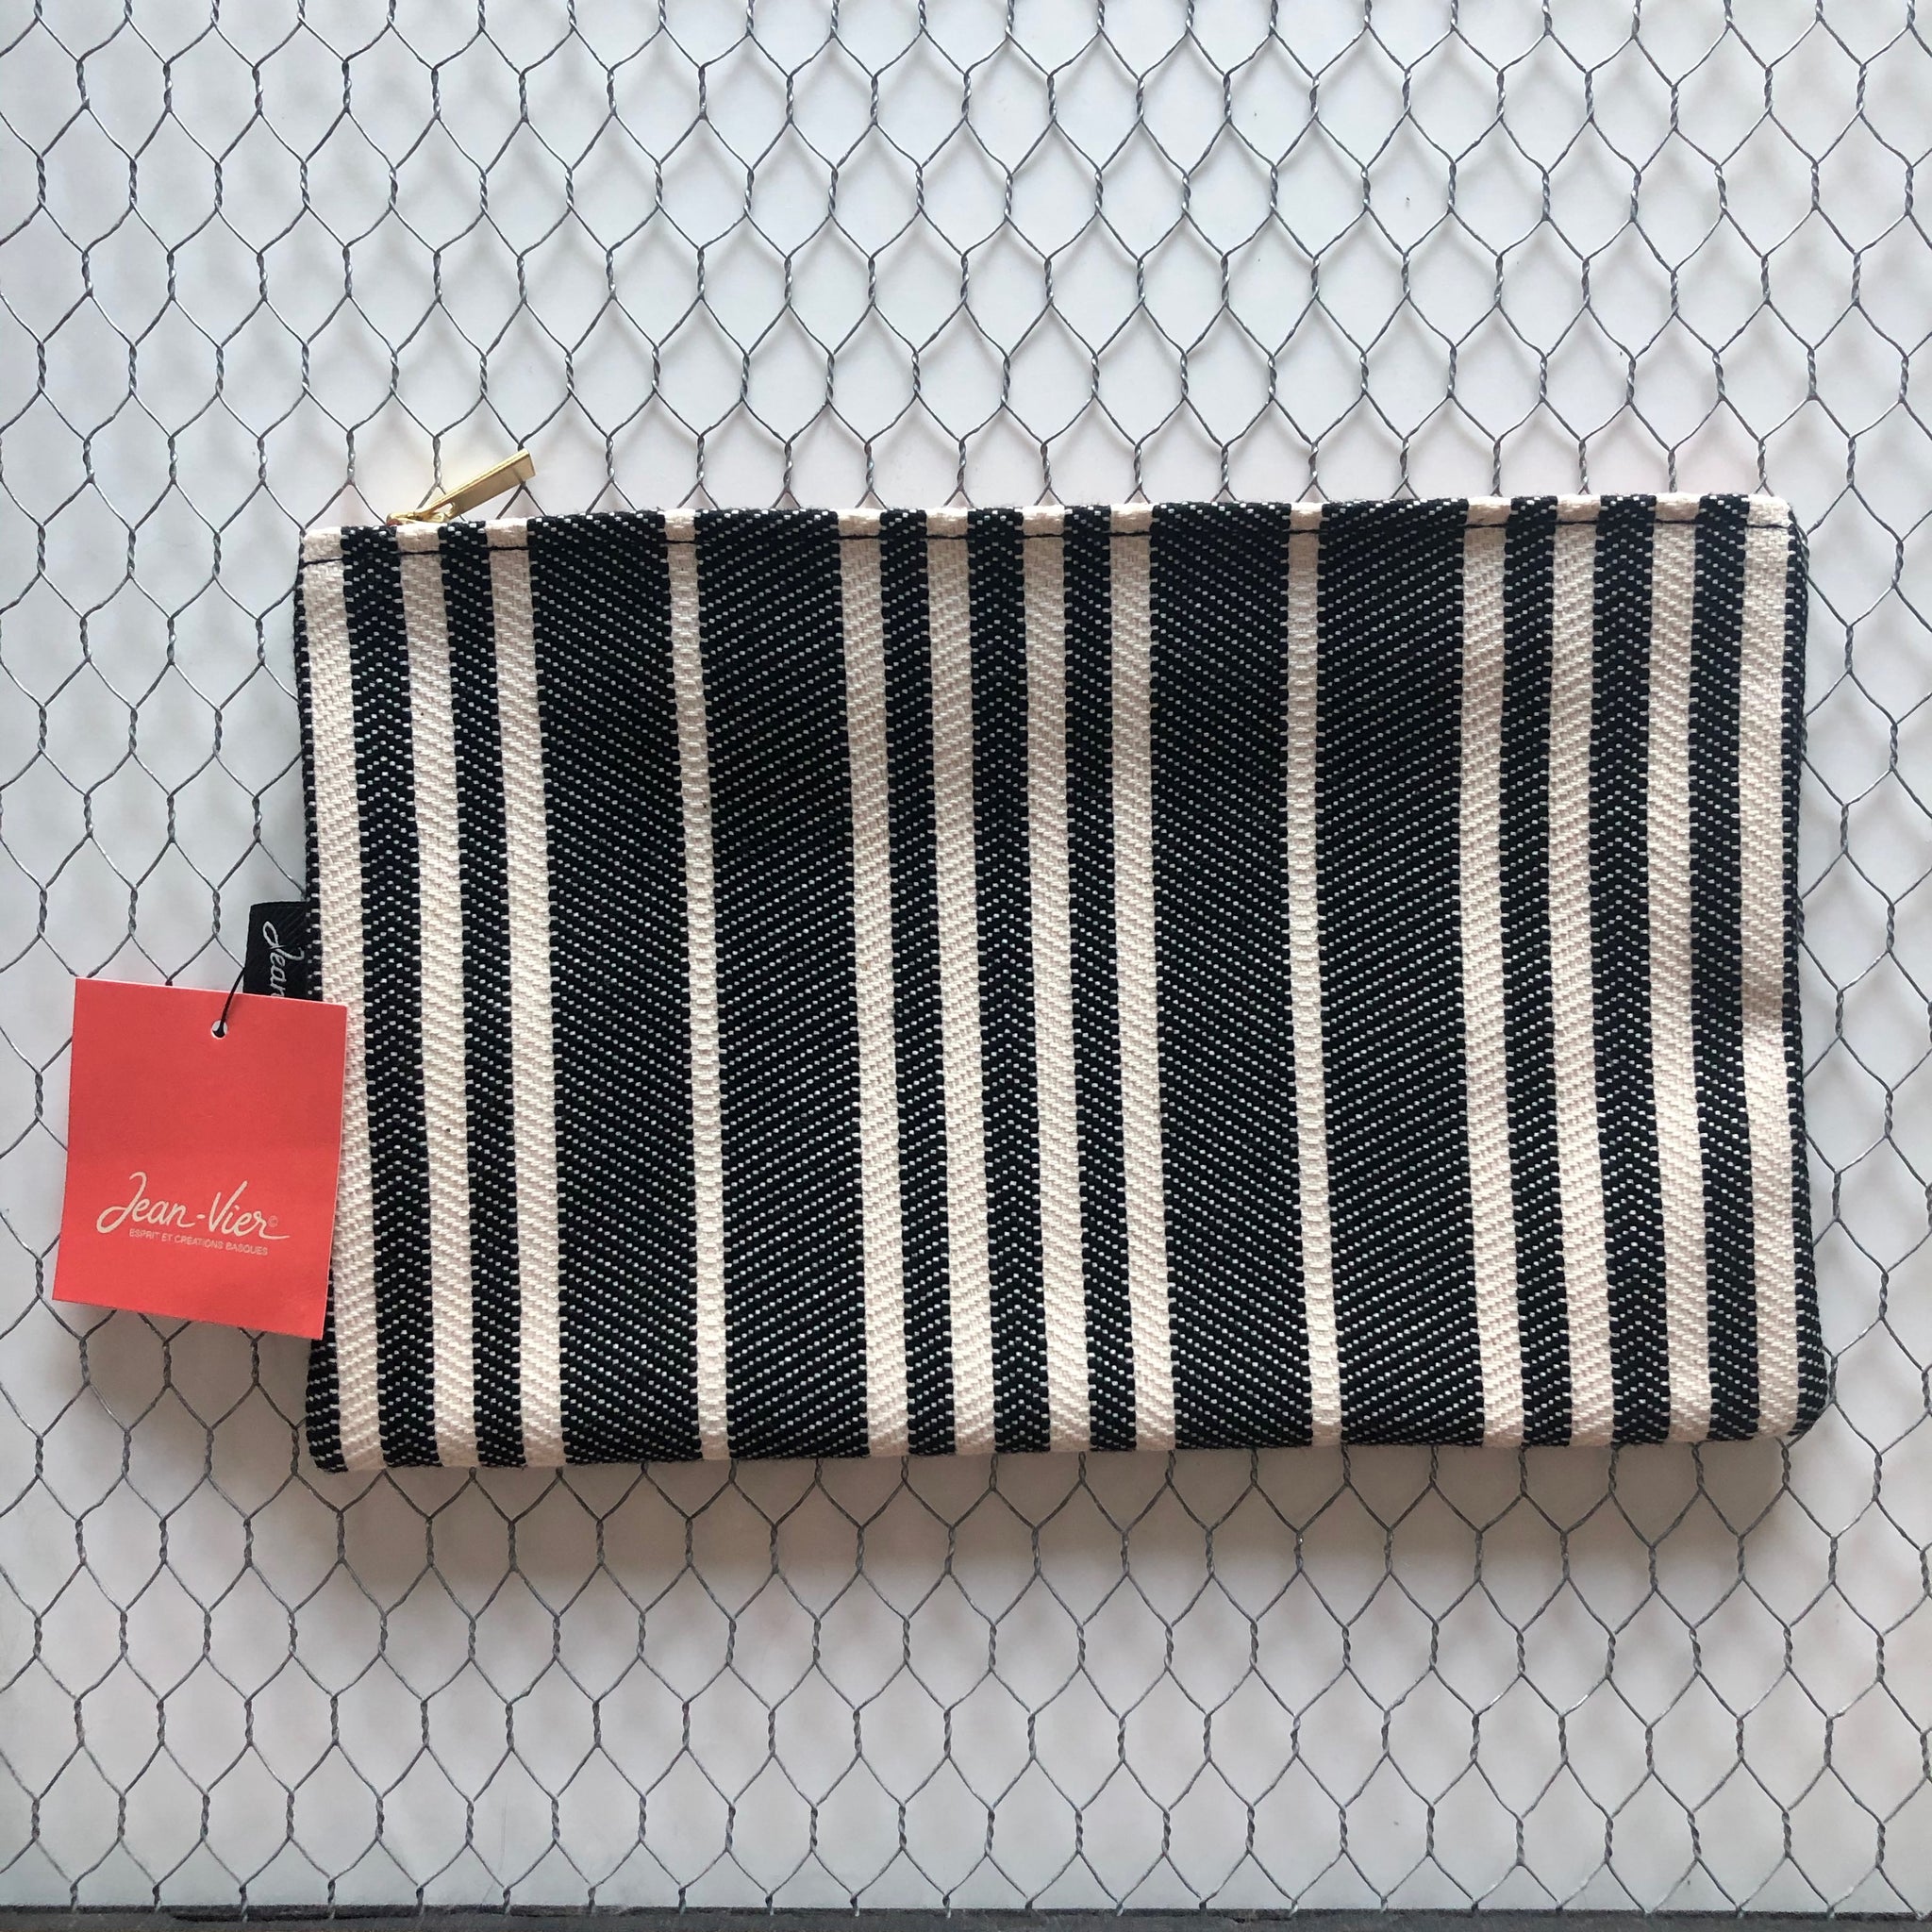 Zippered clutch bag "Black and white" by Jean-Vier "Pochette"